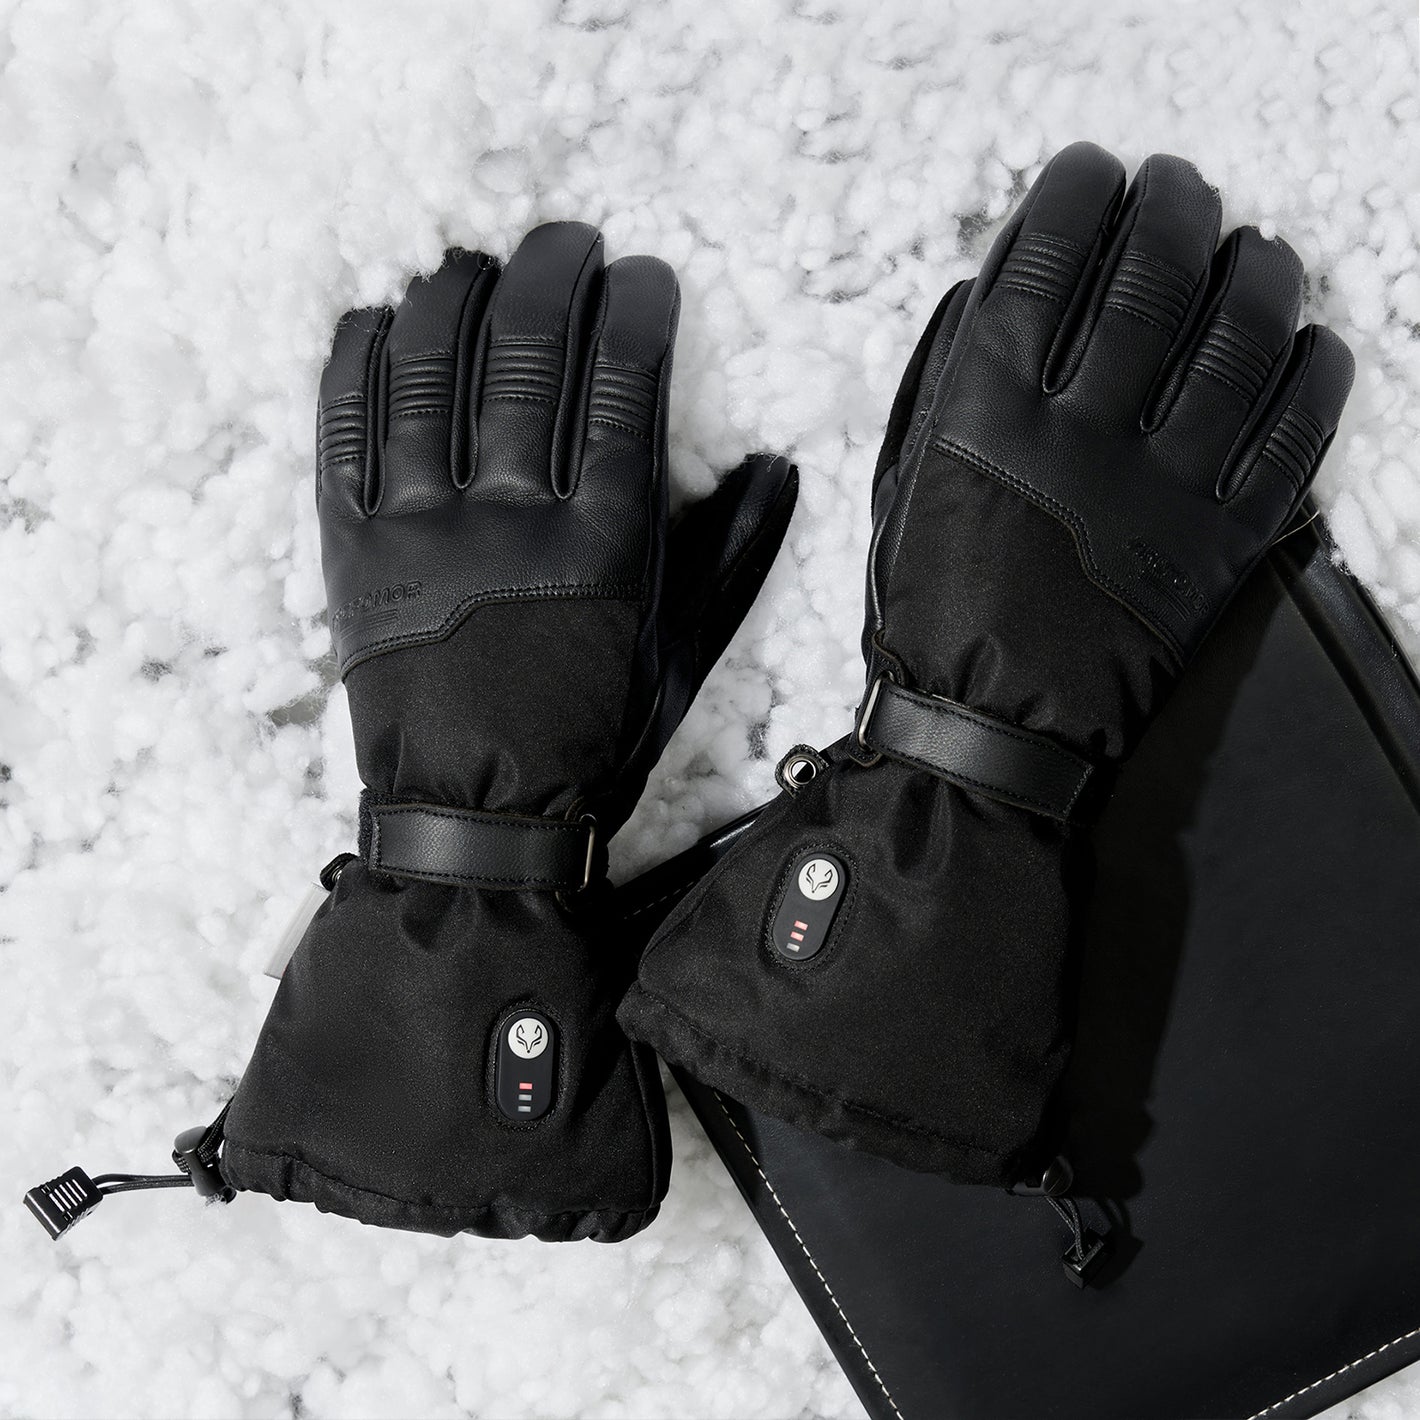 The image shows a pair of Arcfomor "Ottawa Nights" gloves, the outer layer of the gloves is made of leather and the overall design looks simple and elegant.